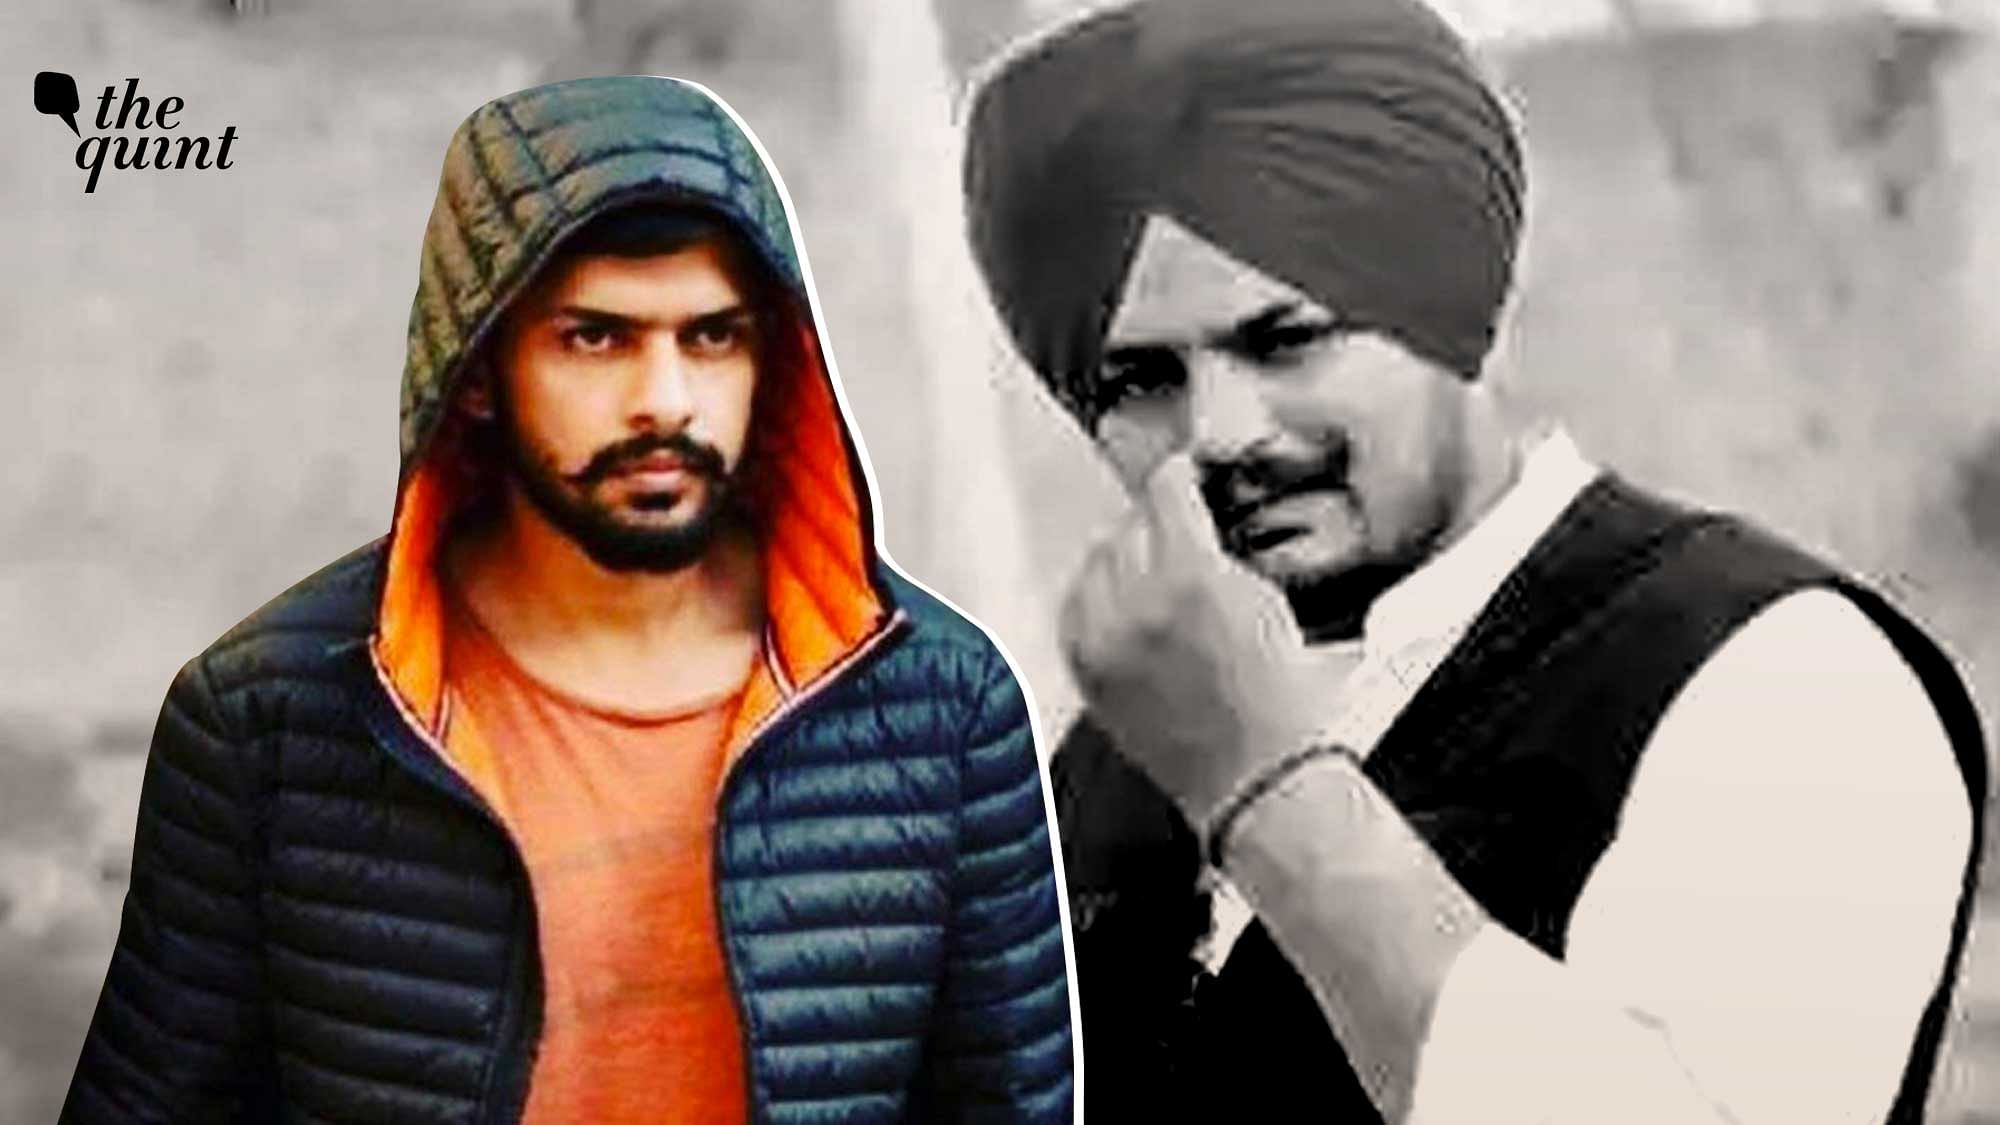 <div class="paragraphs"><p><a href="https://www.thequint.com/topic/lawrence-bishnoi">Gangster Lawrence Bishnoi</a> has admitted that he was the mastermind in Punjabi singer <a href="https://www.thequint.com/big-story/sidhu-moose-wala-death">Sidhu Moosewala's killing</a> and was planning it since last August, Punjab Police ADGP Pramod Ban said on Thursday, 23 June.</p></div>